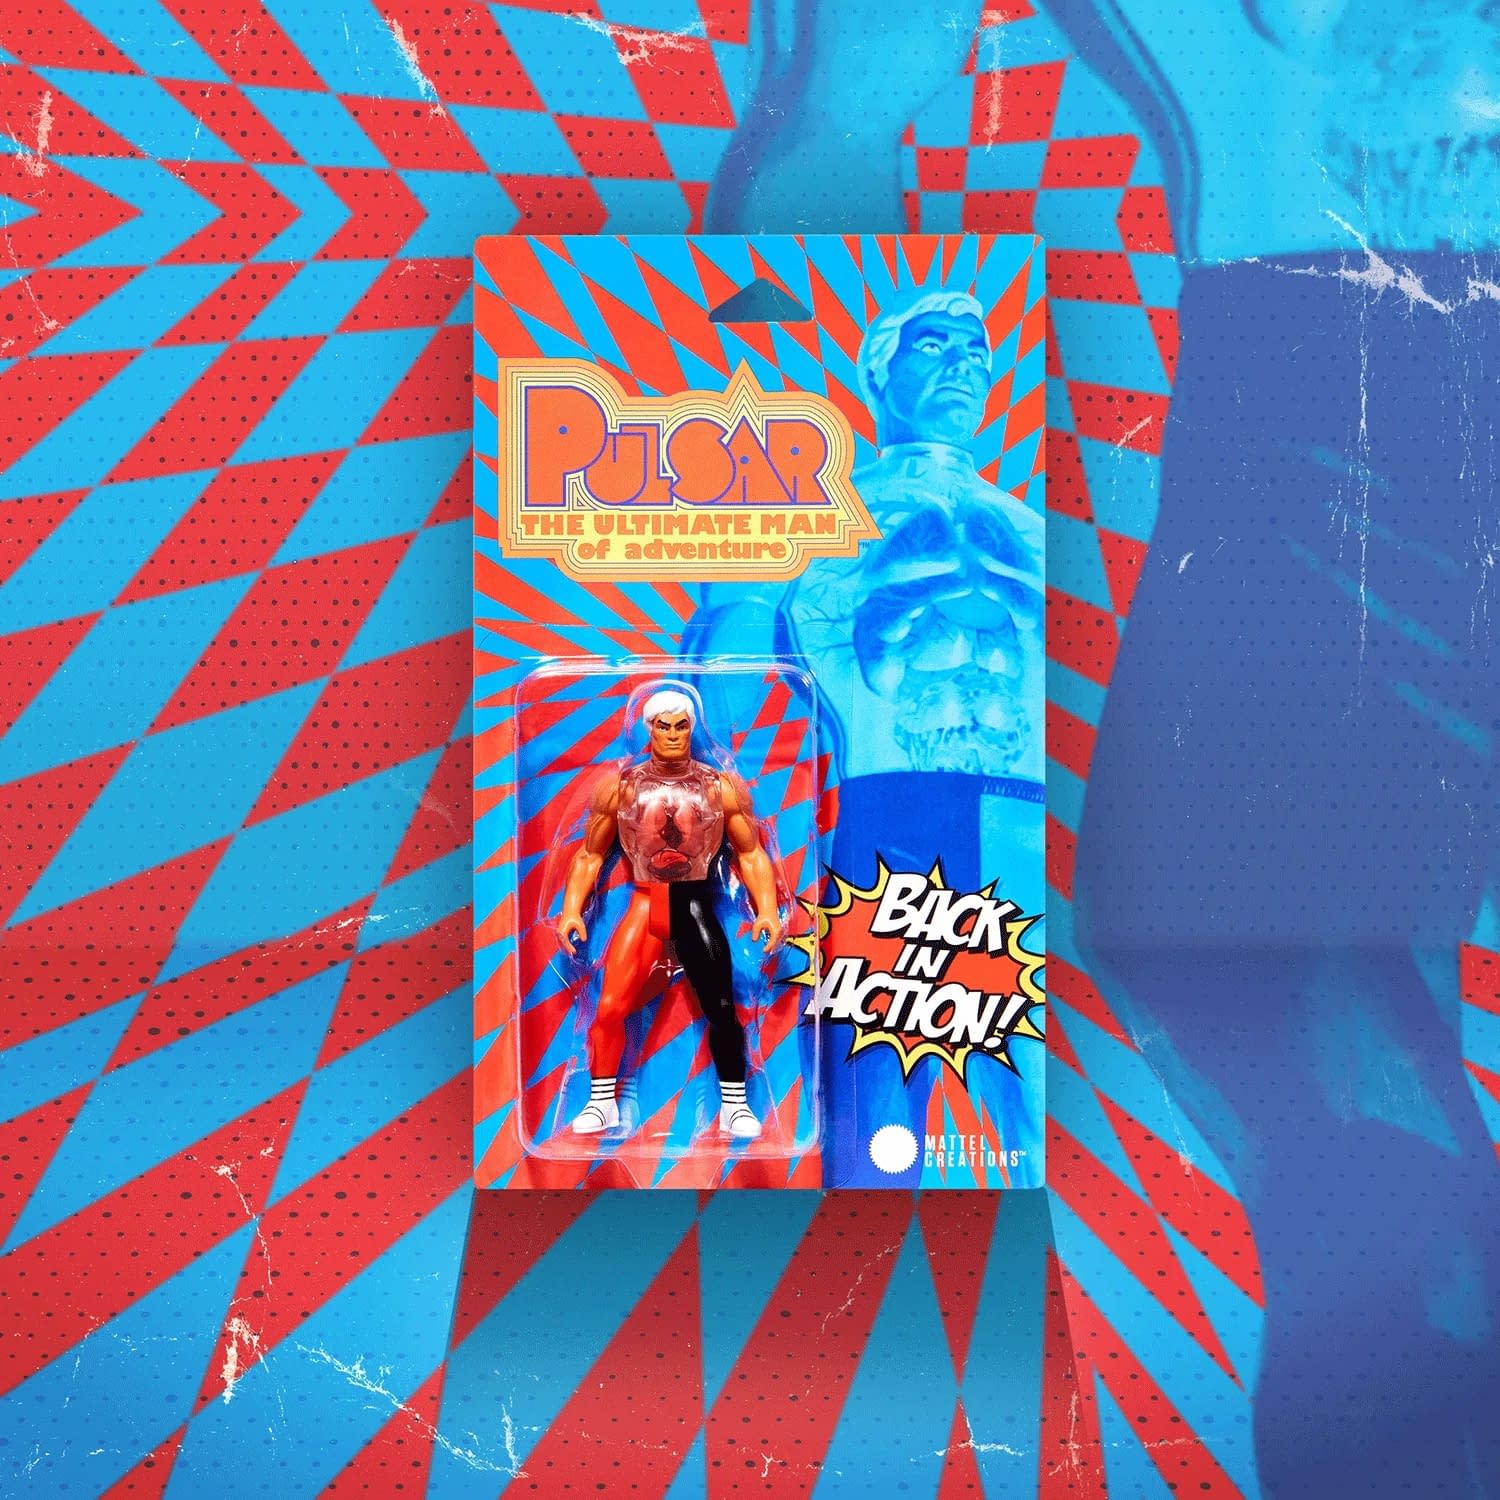 Mattel's First Ever Action Figures Return for SDCC with Back in Action Set 